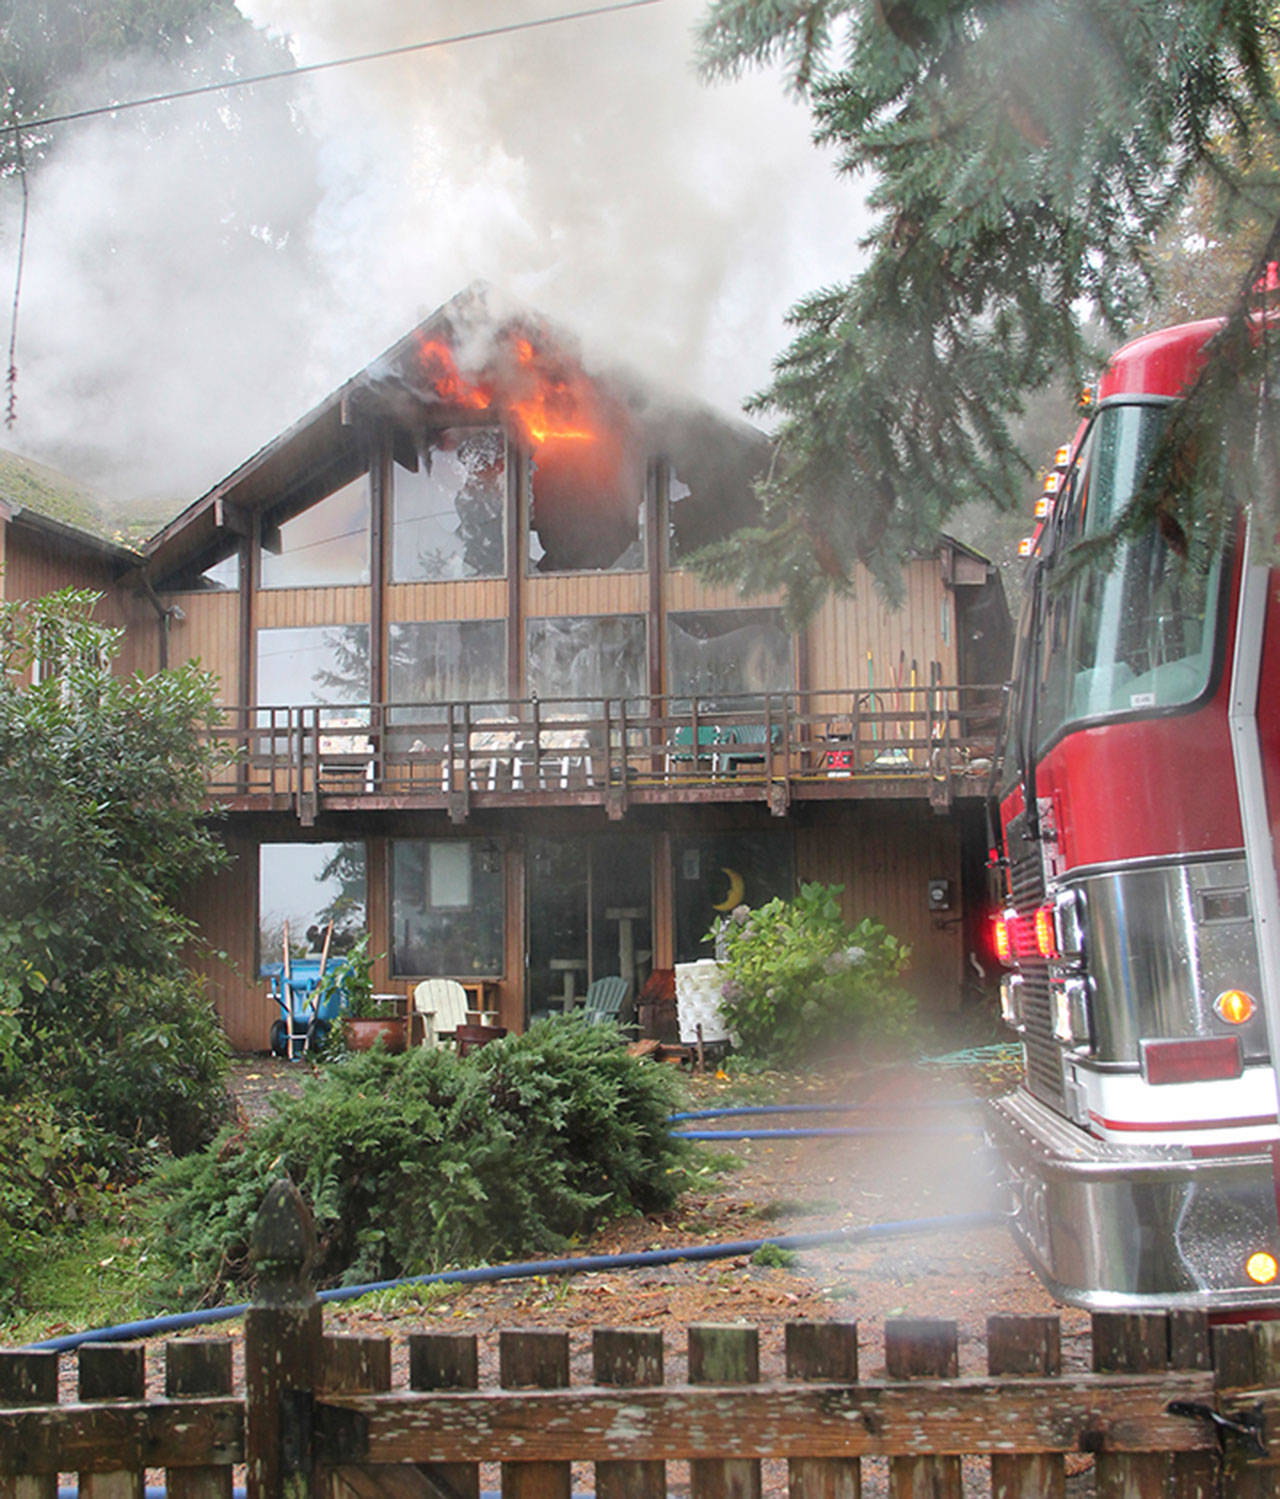 The owner of the home, Kathryn Lehet, returned from Seattle to find her house on fire. (Susan Riemer/Staff Photo)